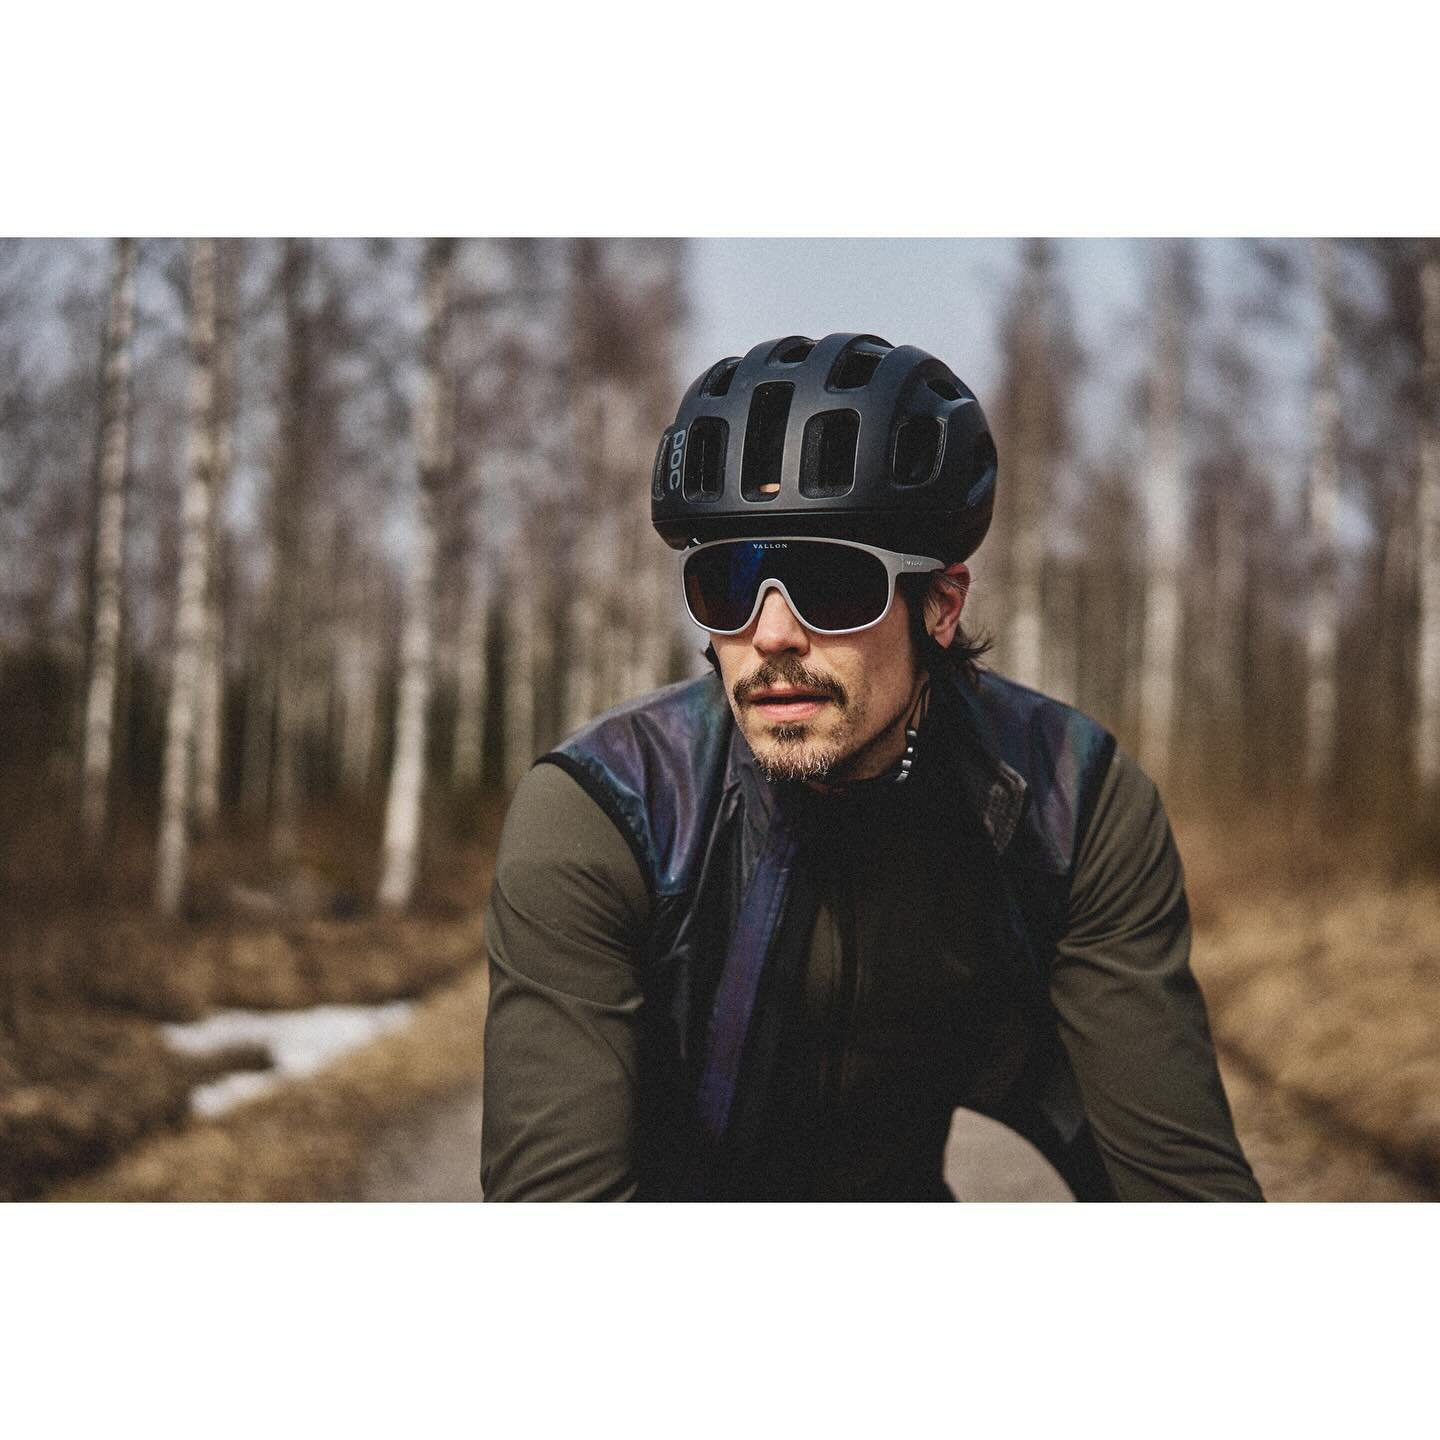 For the last couple of months I&rsquo;ve been watching bike roads and ski tracks through these @vallon_official Watchtowers sunglasses! Classic style, maximum performance! Really like that! 
You can read more my thoughts in my blog! It&rsquo;s in Fin